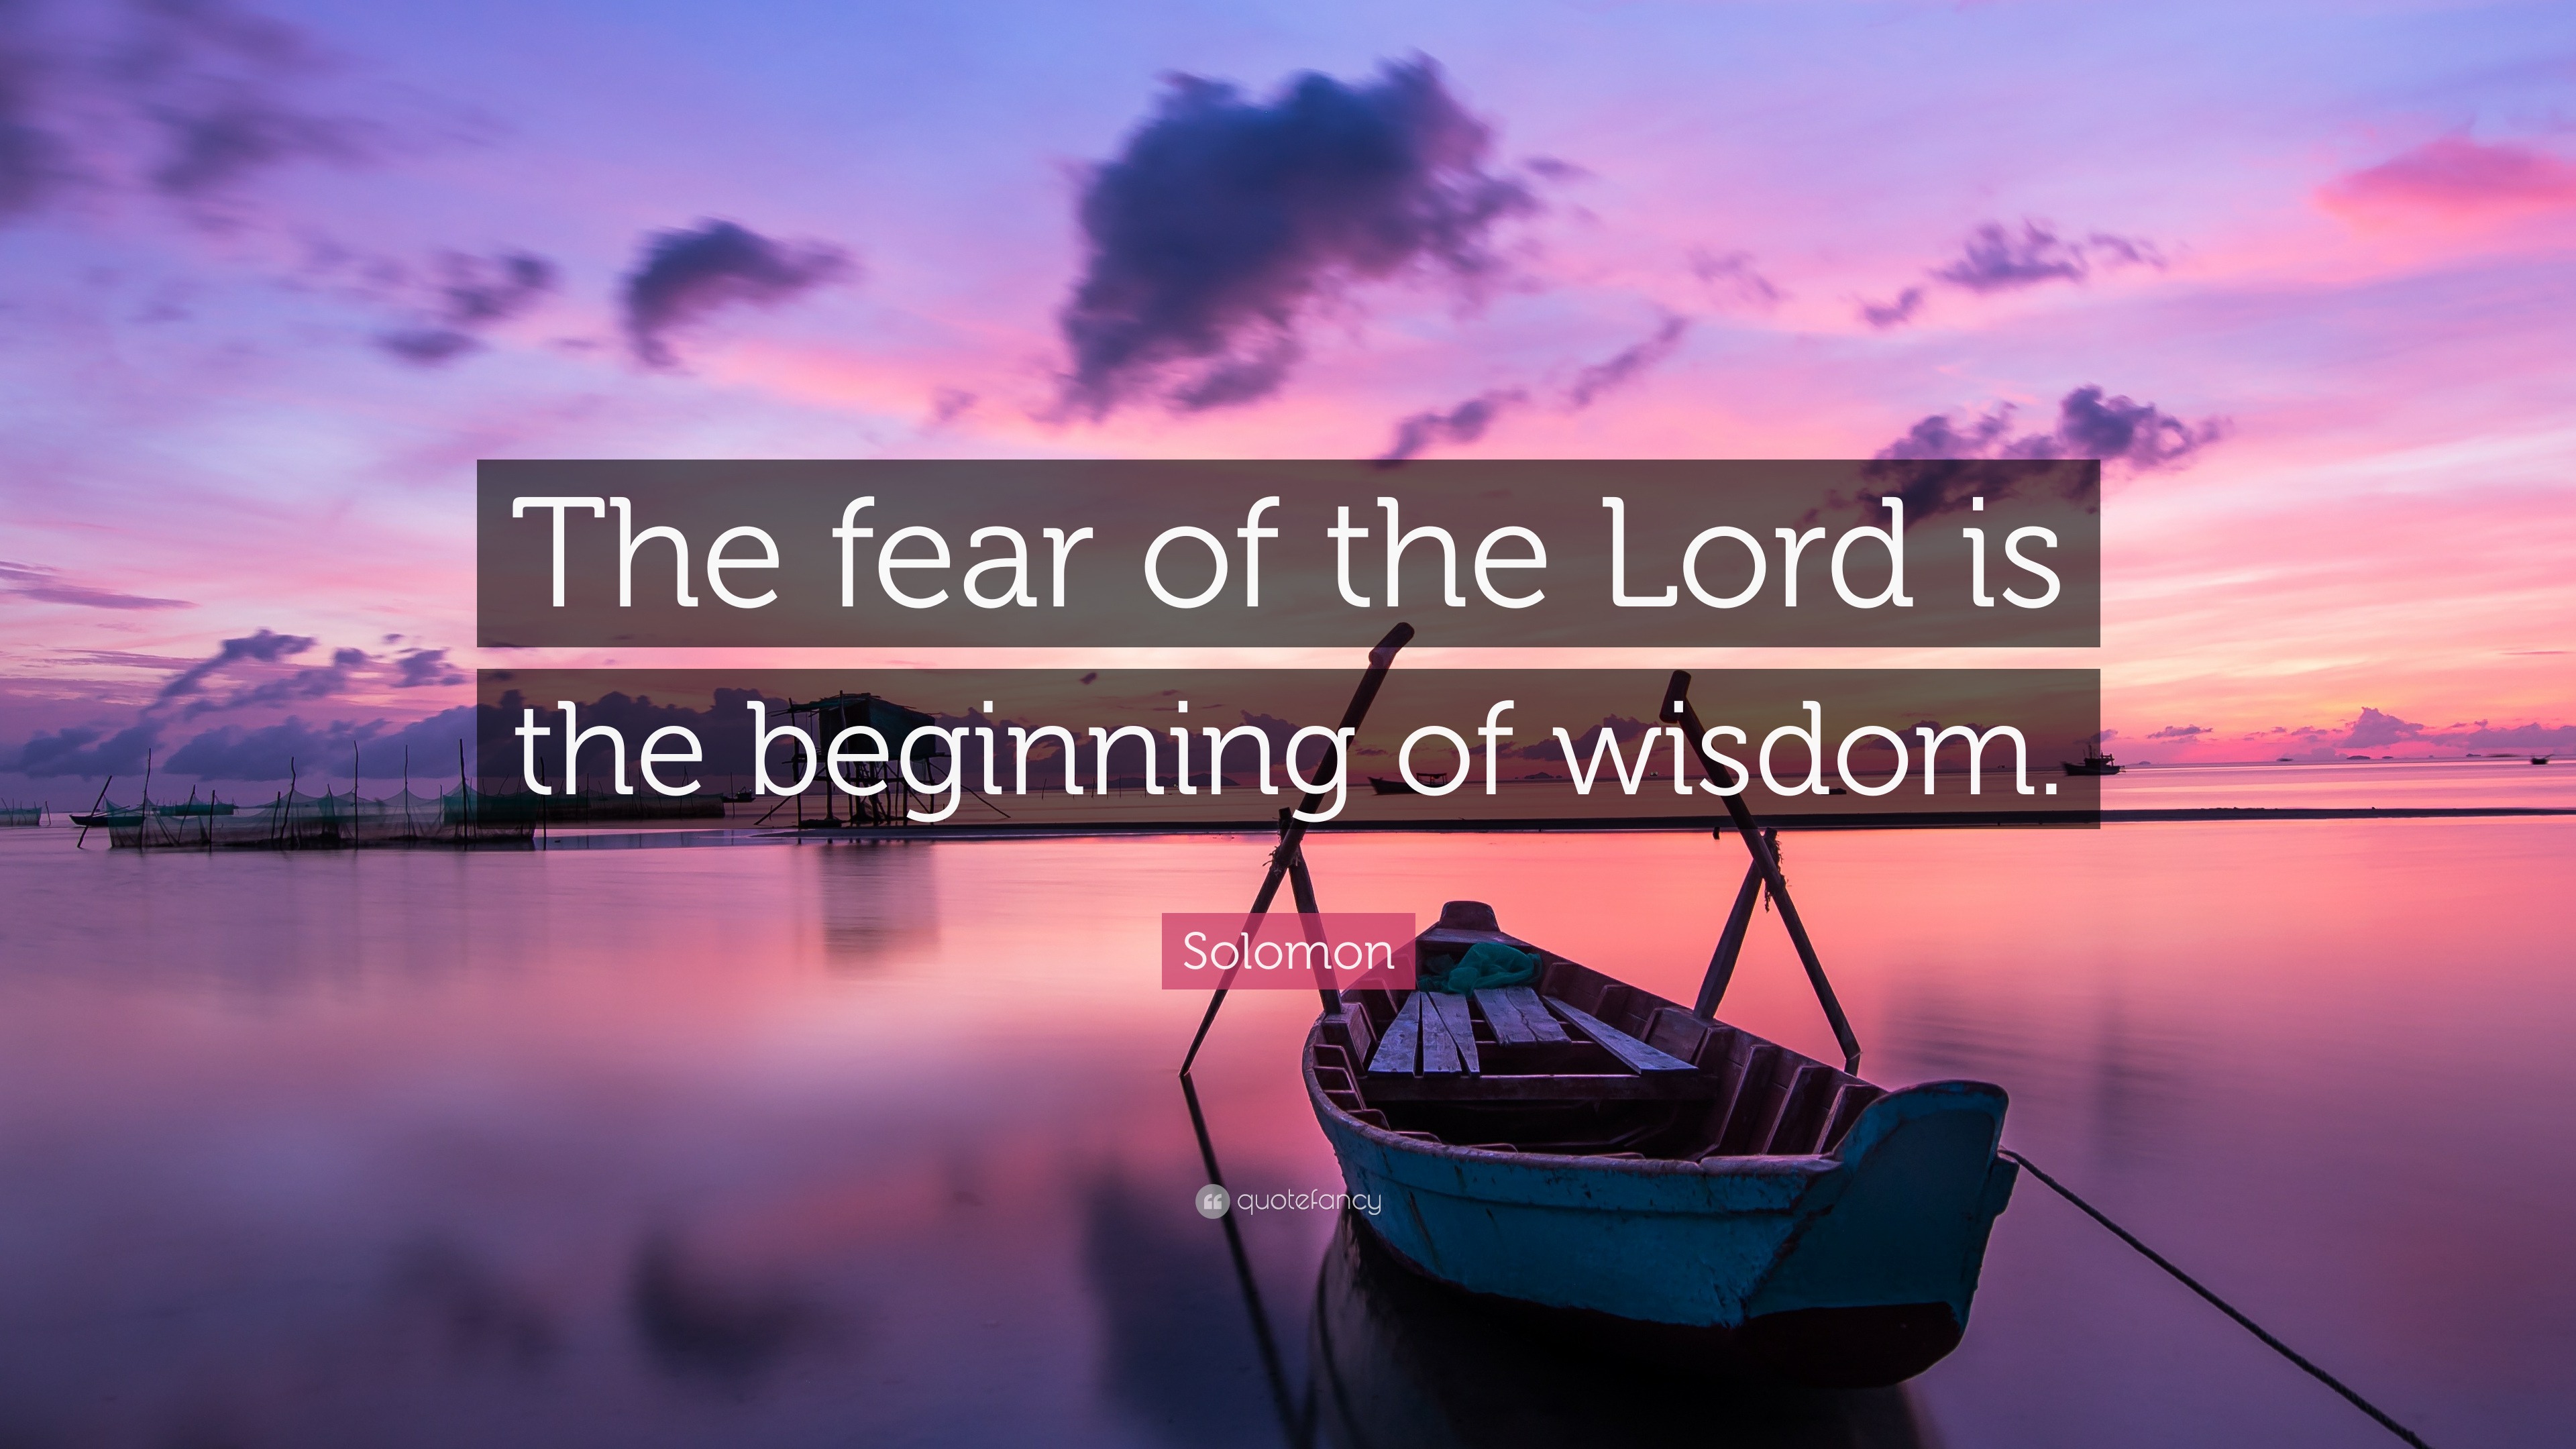 Solomon Quote: “The fear of the Lord is the beginning of wisdom.”